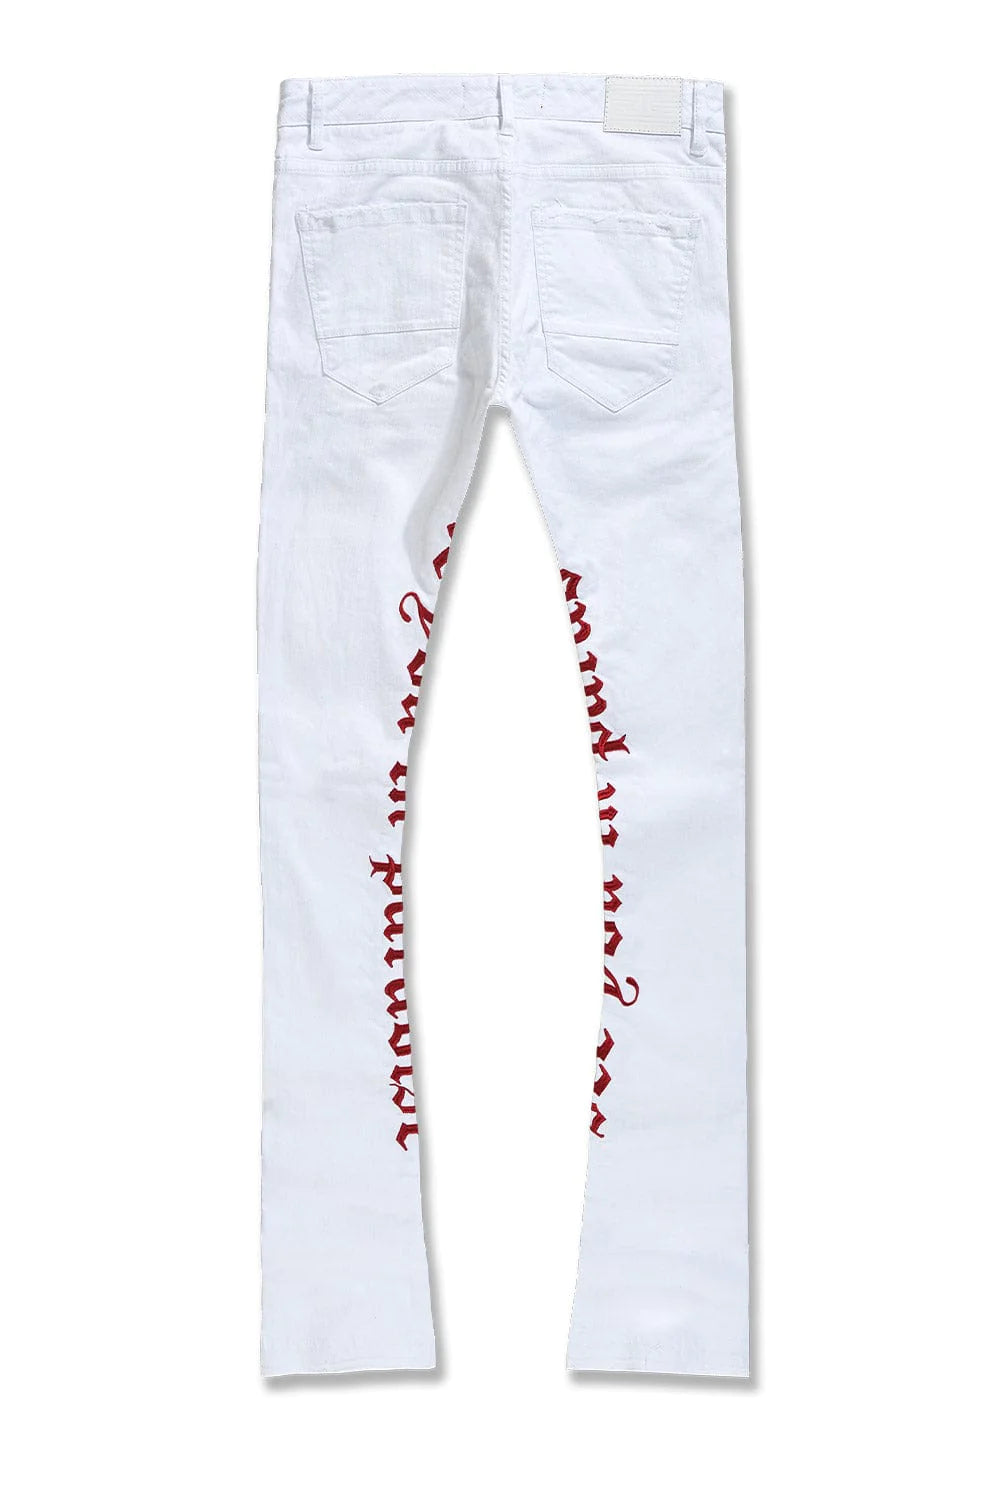 MARTIN STACKED - SEE YOU IN PARADISE DENIM (WHITE) JTF1154A